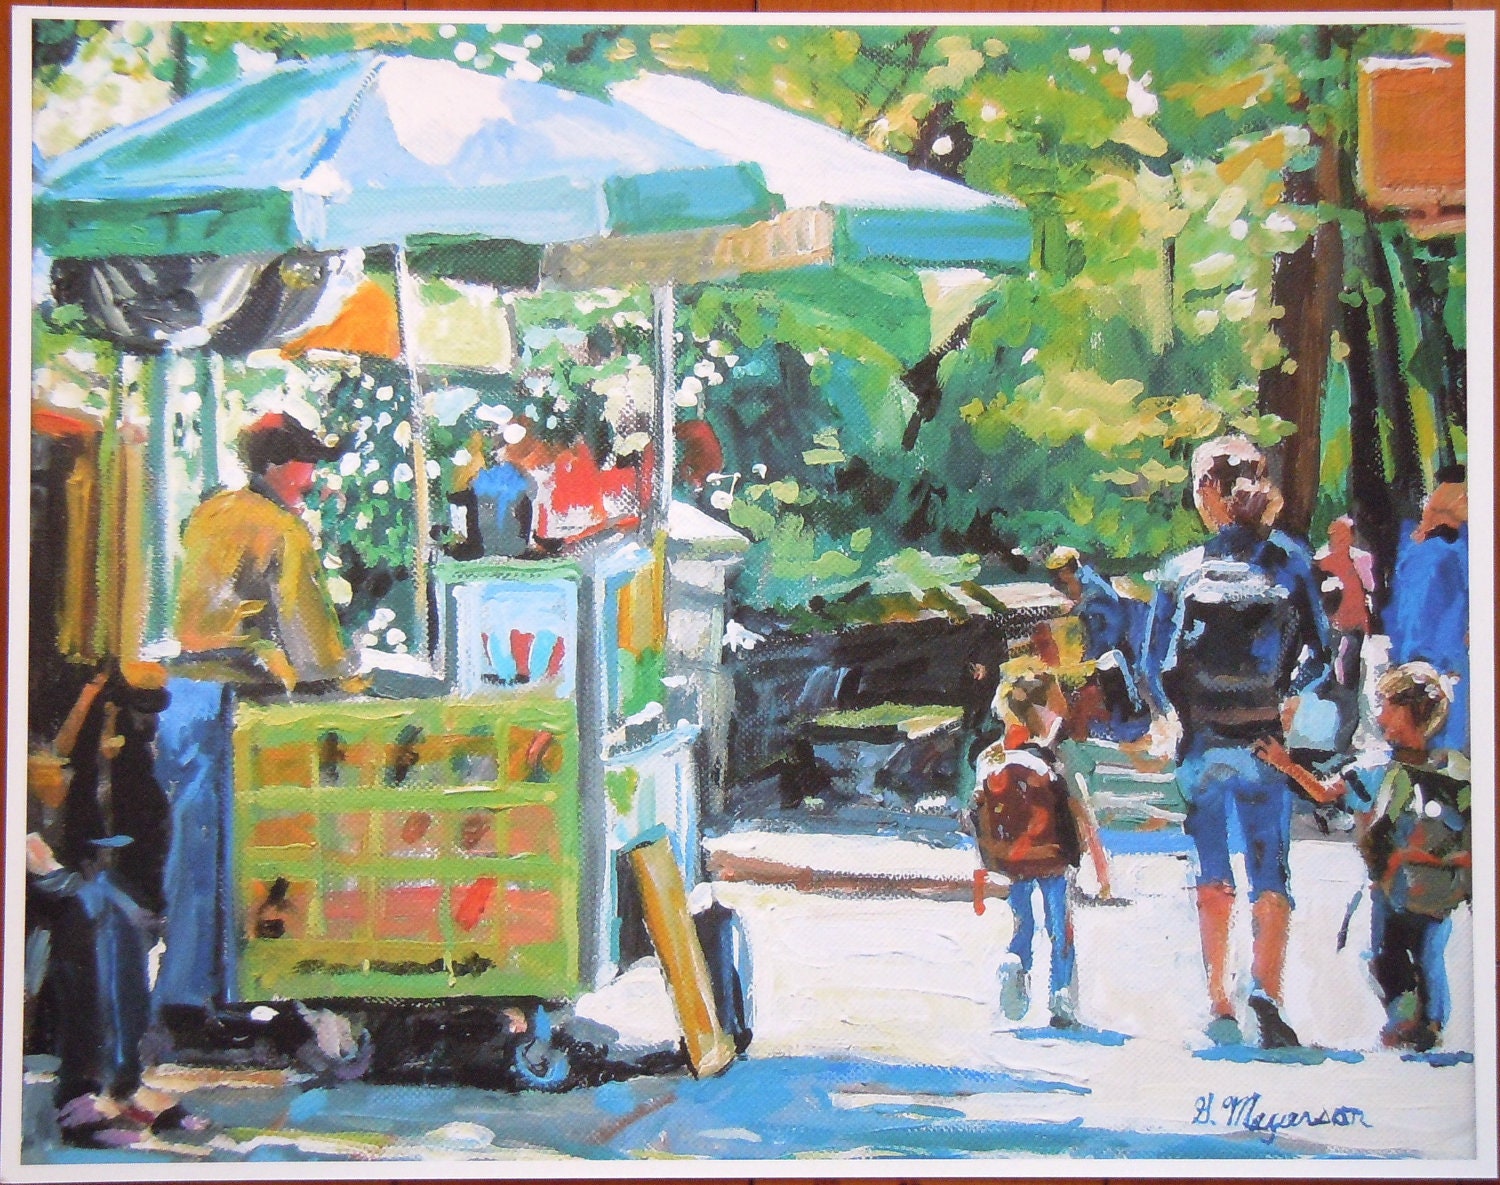 Large 12x15 Fine Art Print, "Central Park Vendor" New York City Summer yellow green Cityscape Painting by Gwen Meyerson